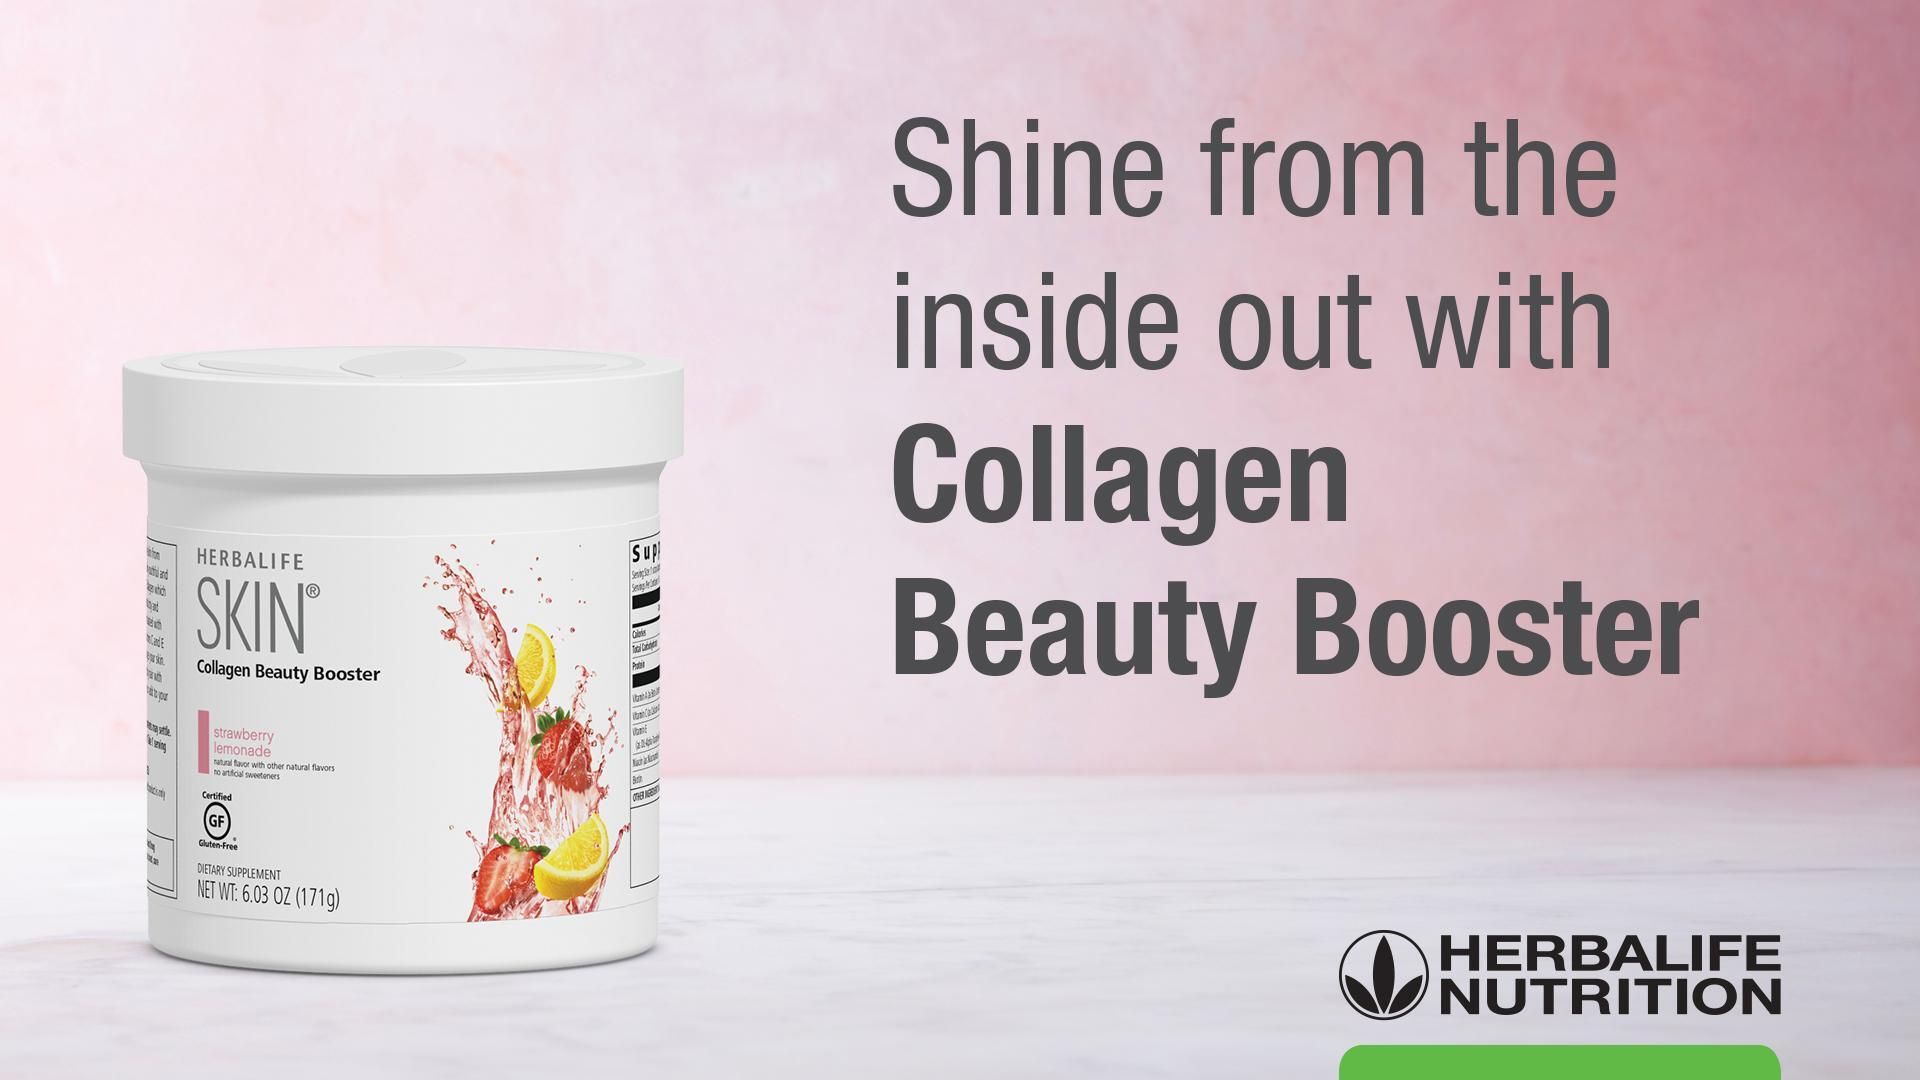 Collagen Beauty Booster: Know the Products - Skin & Hair Care - Herbalife  Product Videos/usen